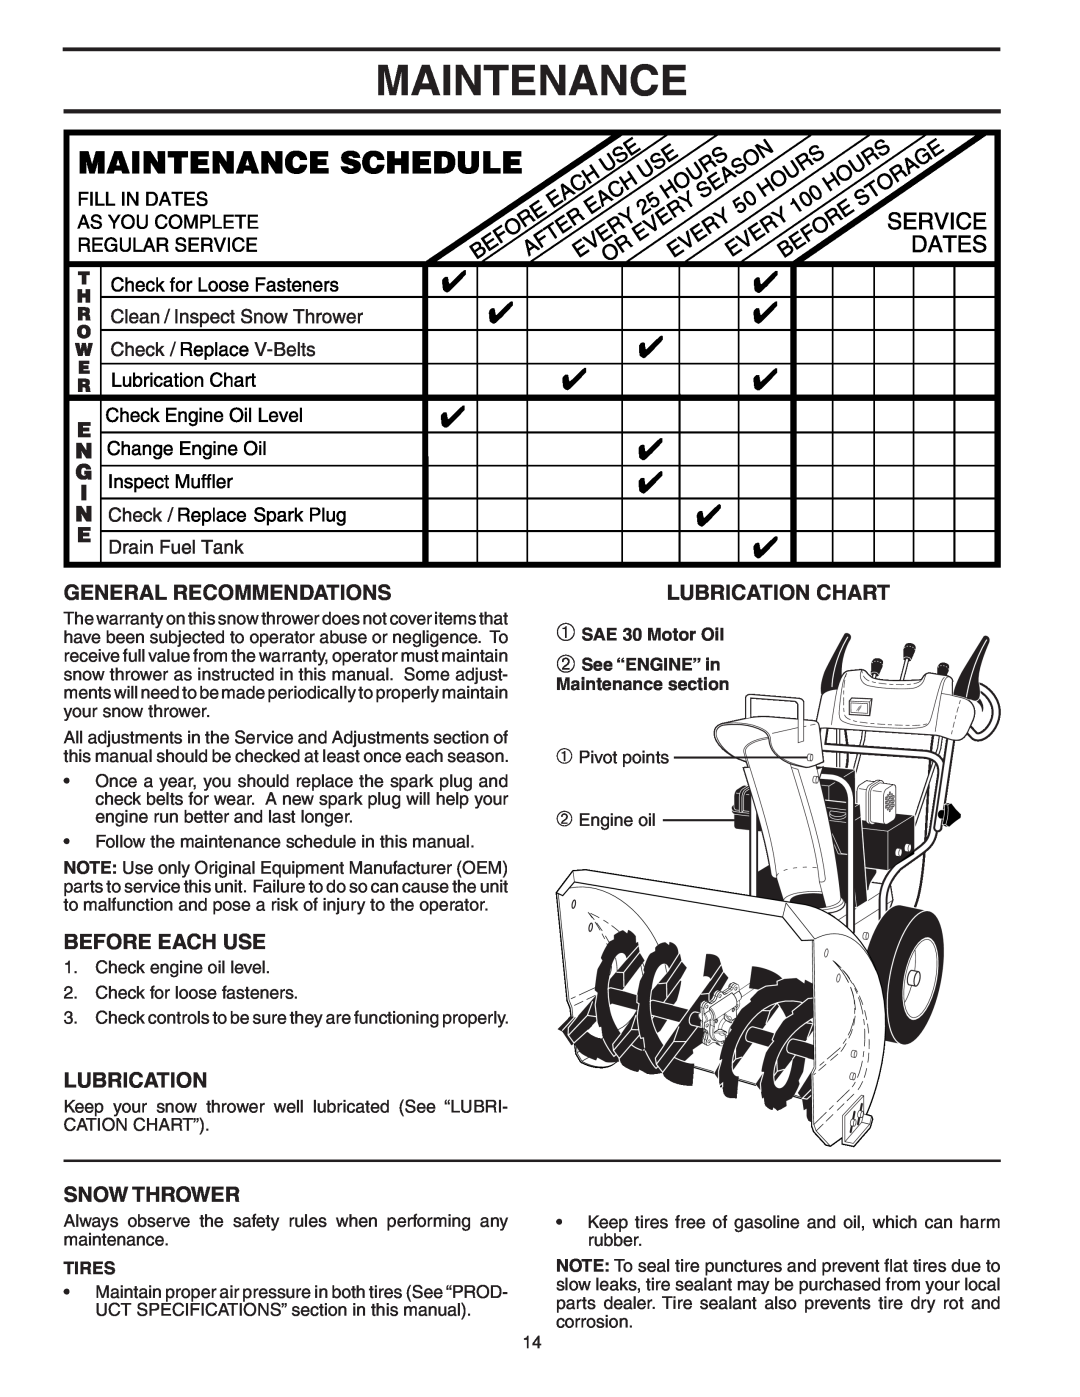 Poulan P8527ESA Maintenance, General Recommendations, Before Each Use, Snow Thrower, Lubrication Chart, Tires 